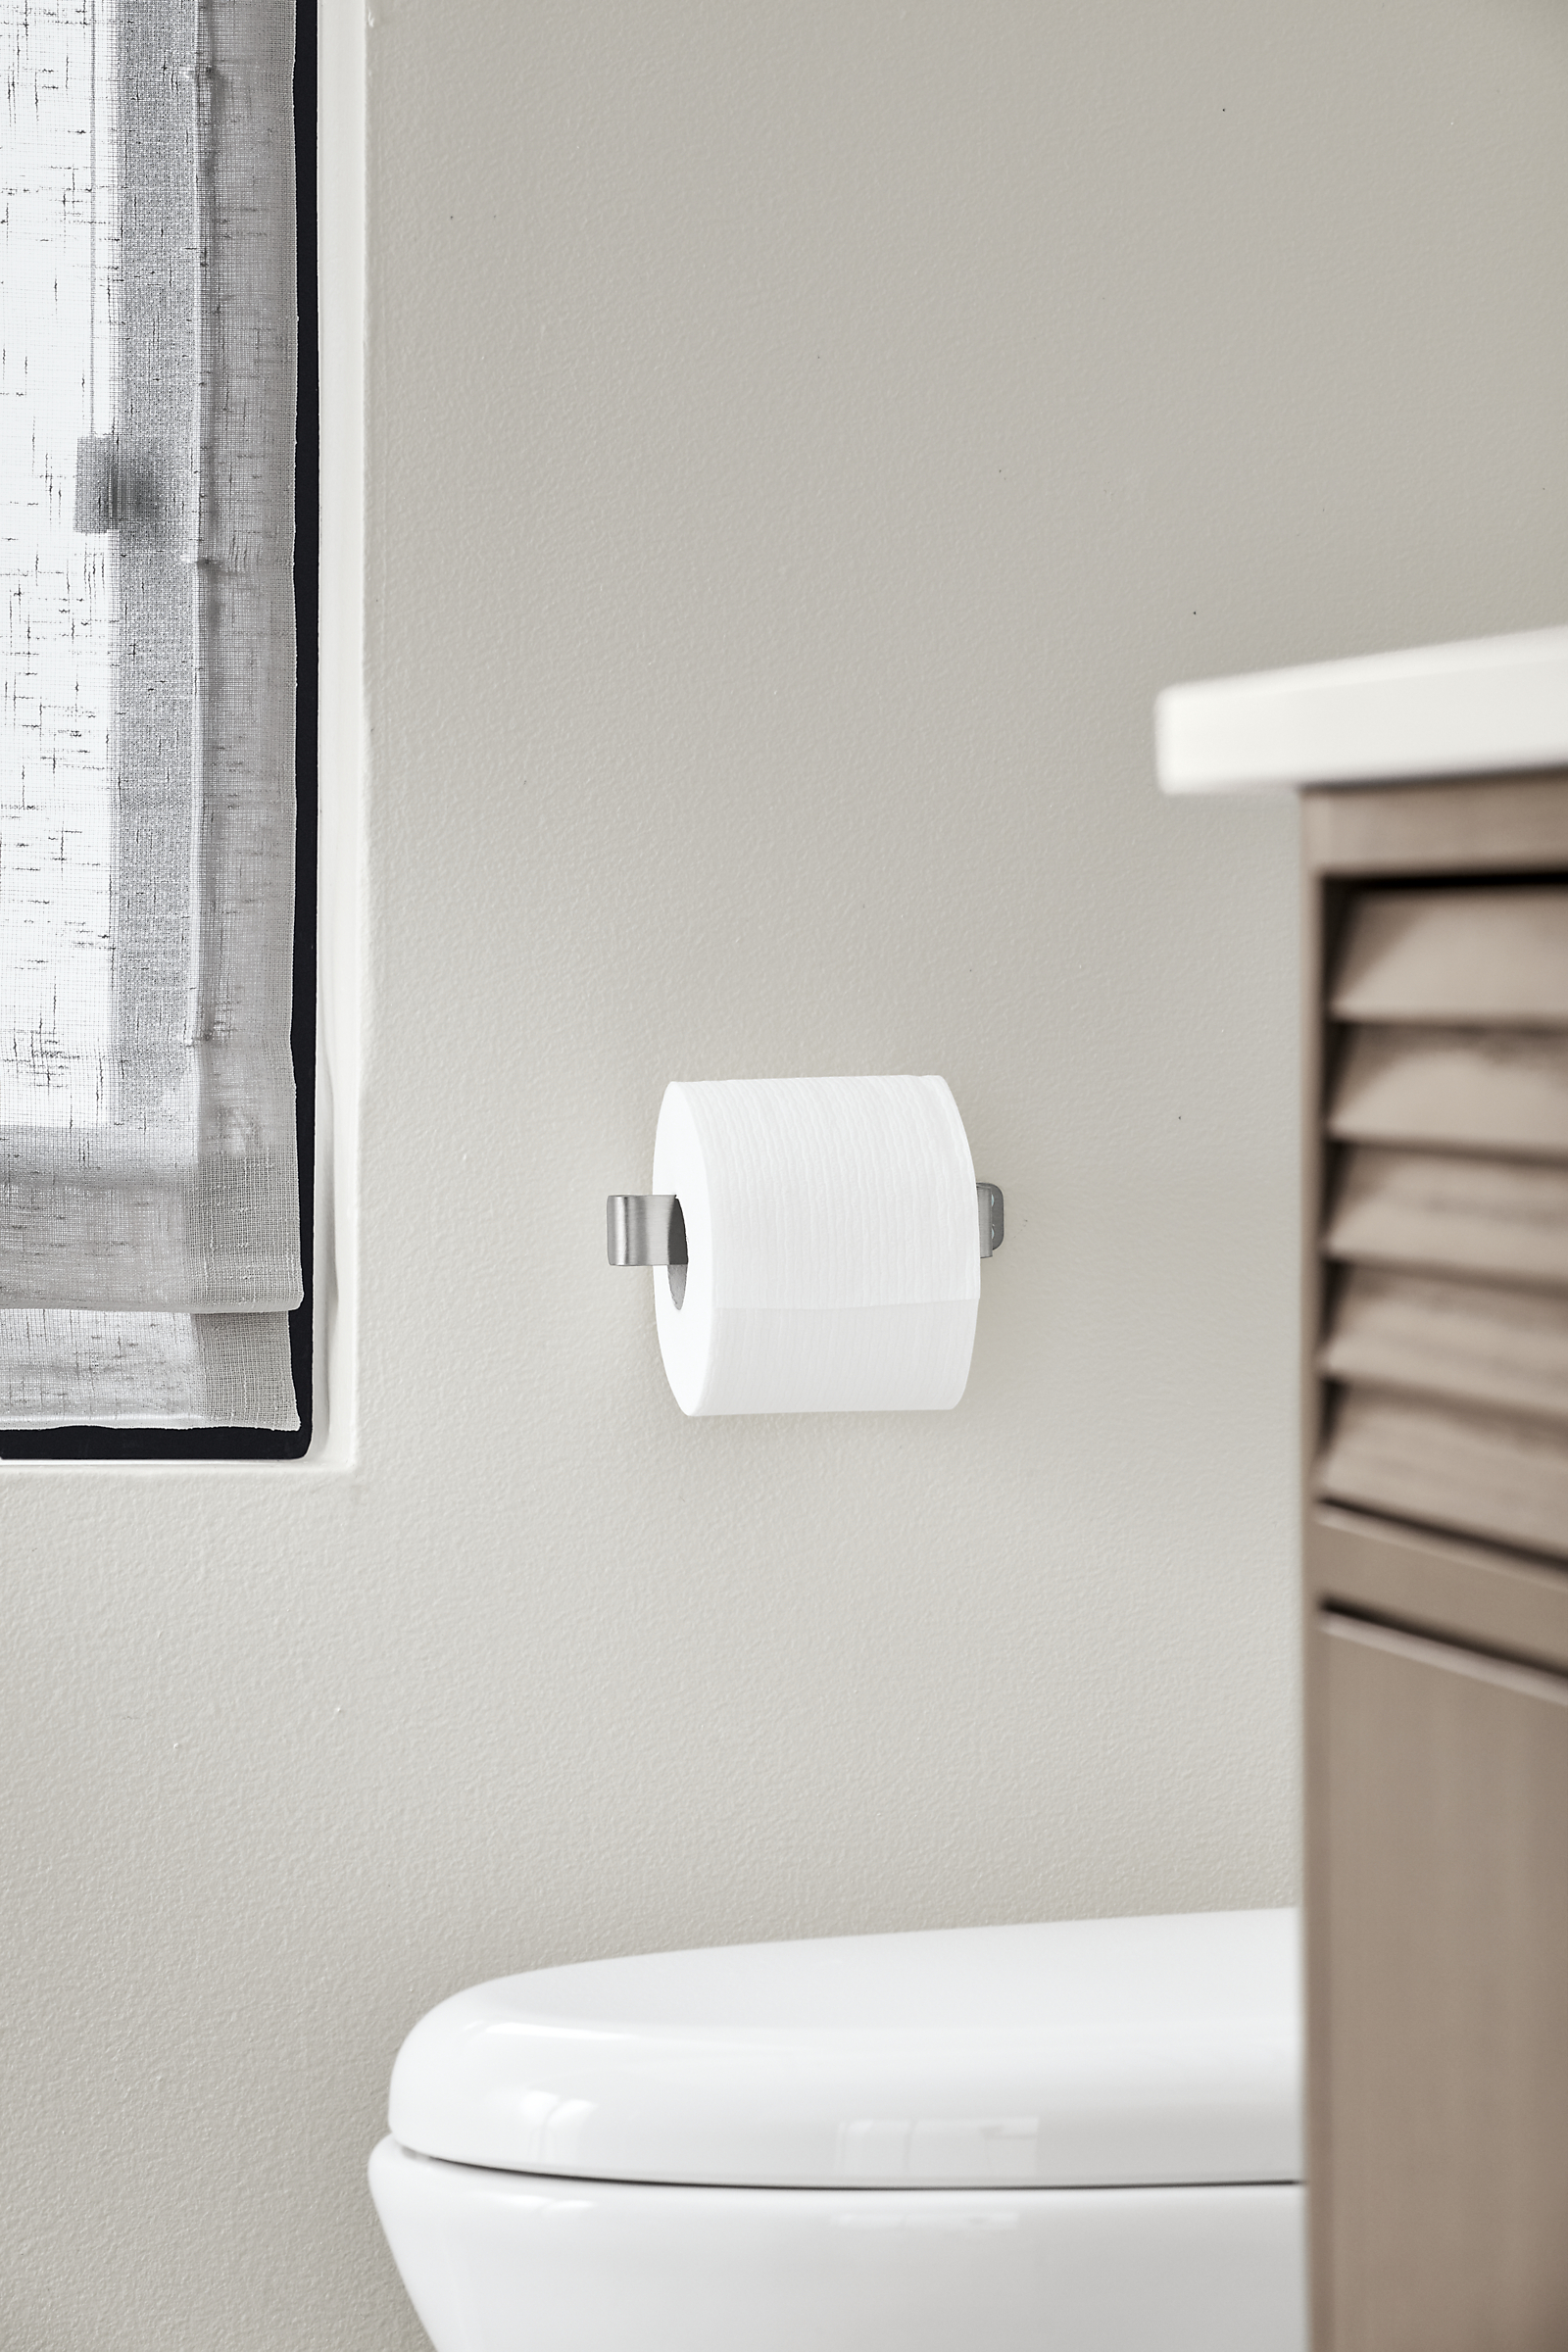 Detail of Bend wall mounted single toilet paper holder.